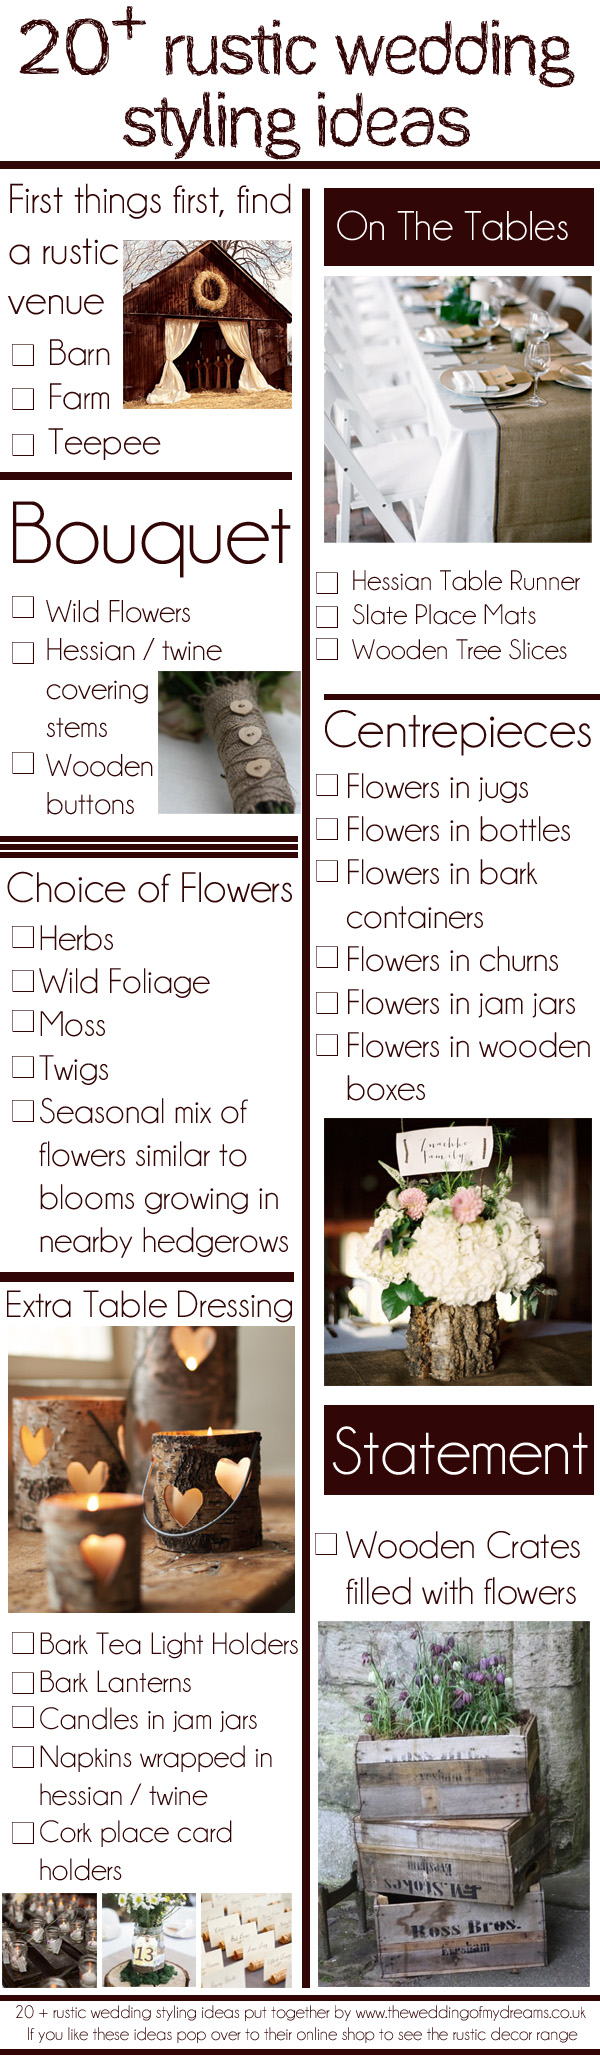 6 Wedding Checklist Templates for Rustic, Beach and ...